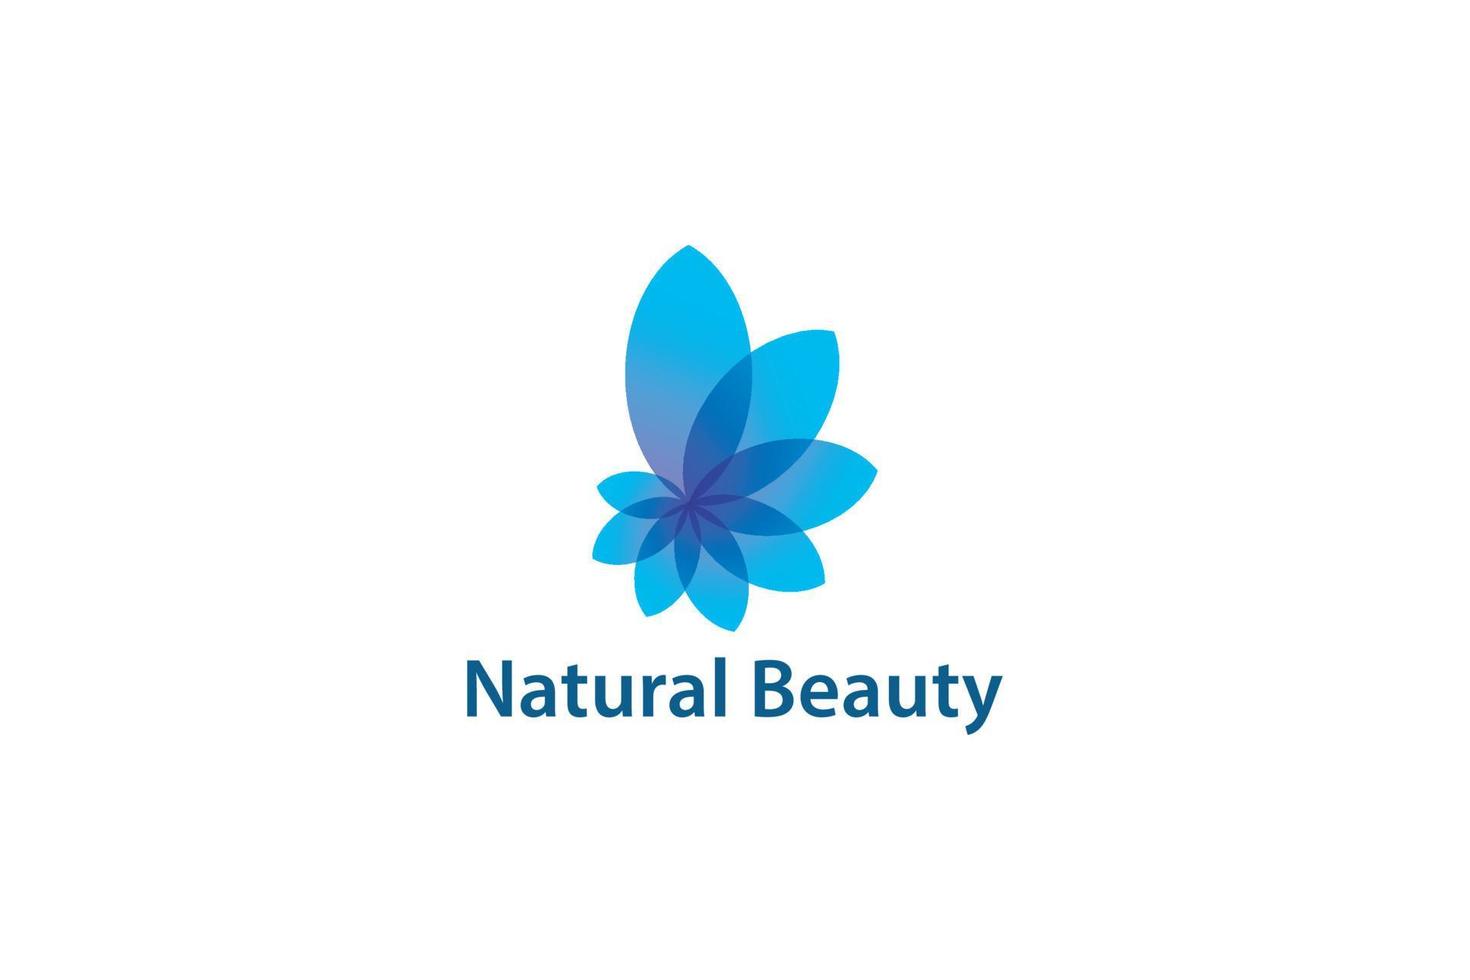 Blue color natural beauty abstract floral design business logo vector